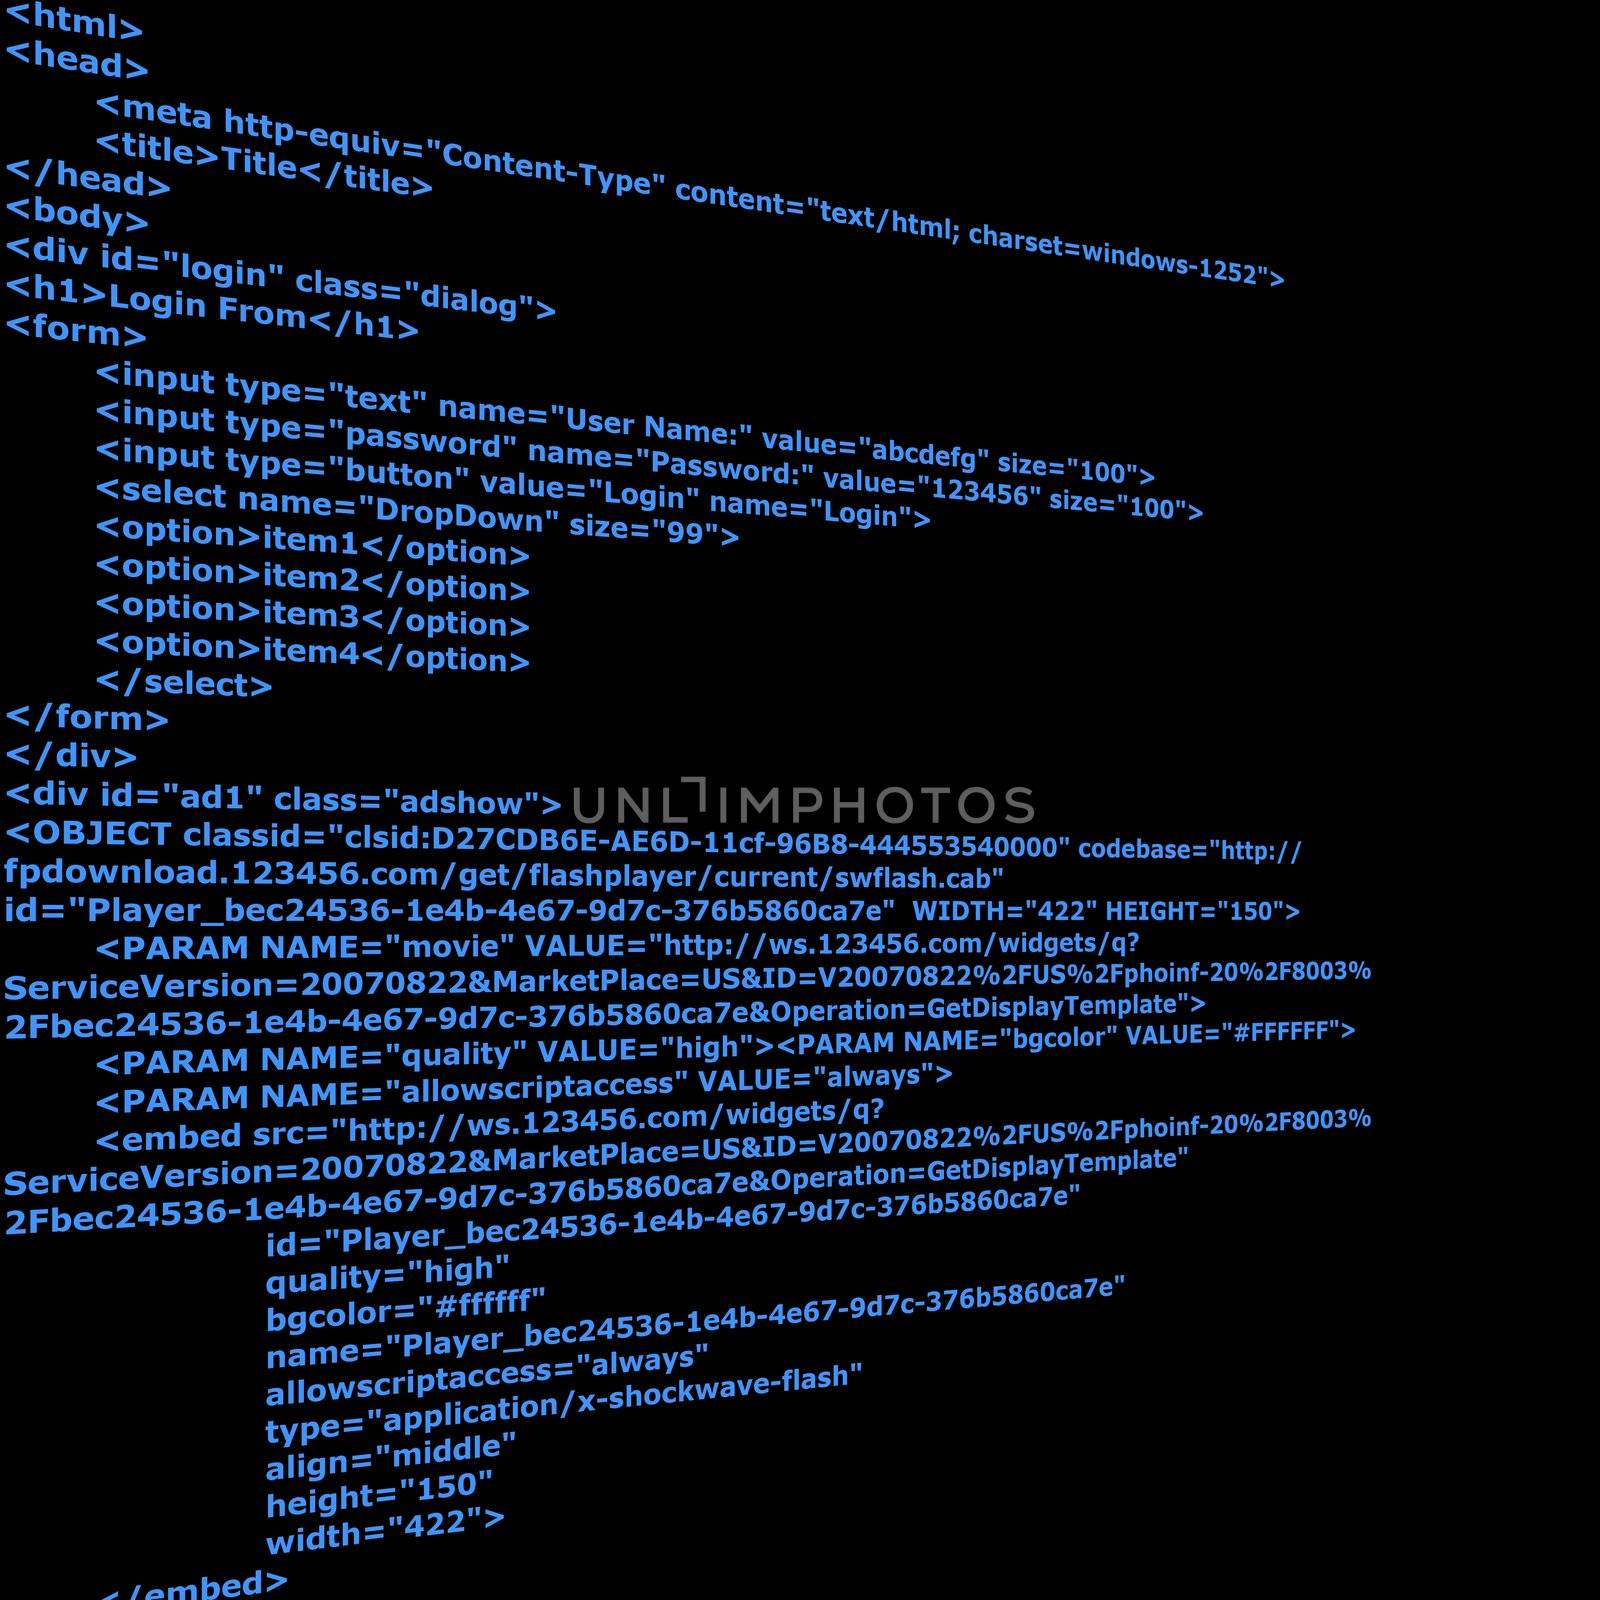 Blue Html code text with black background